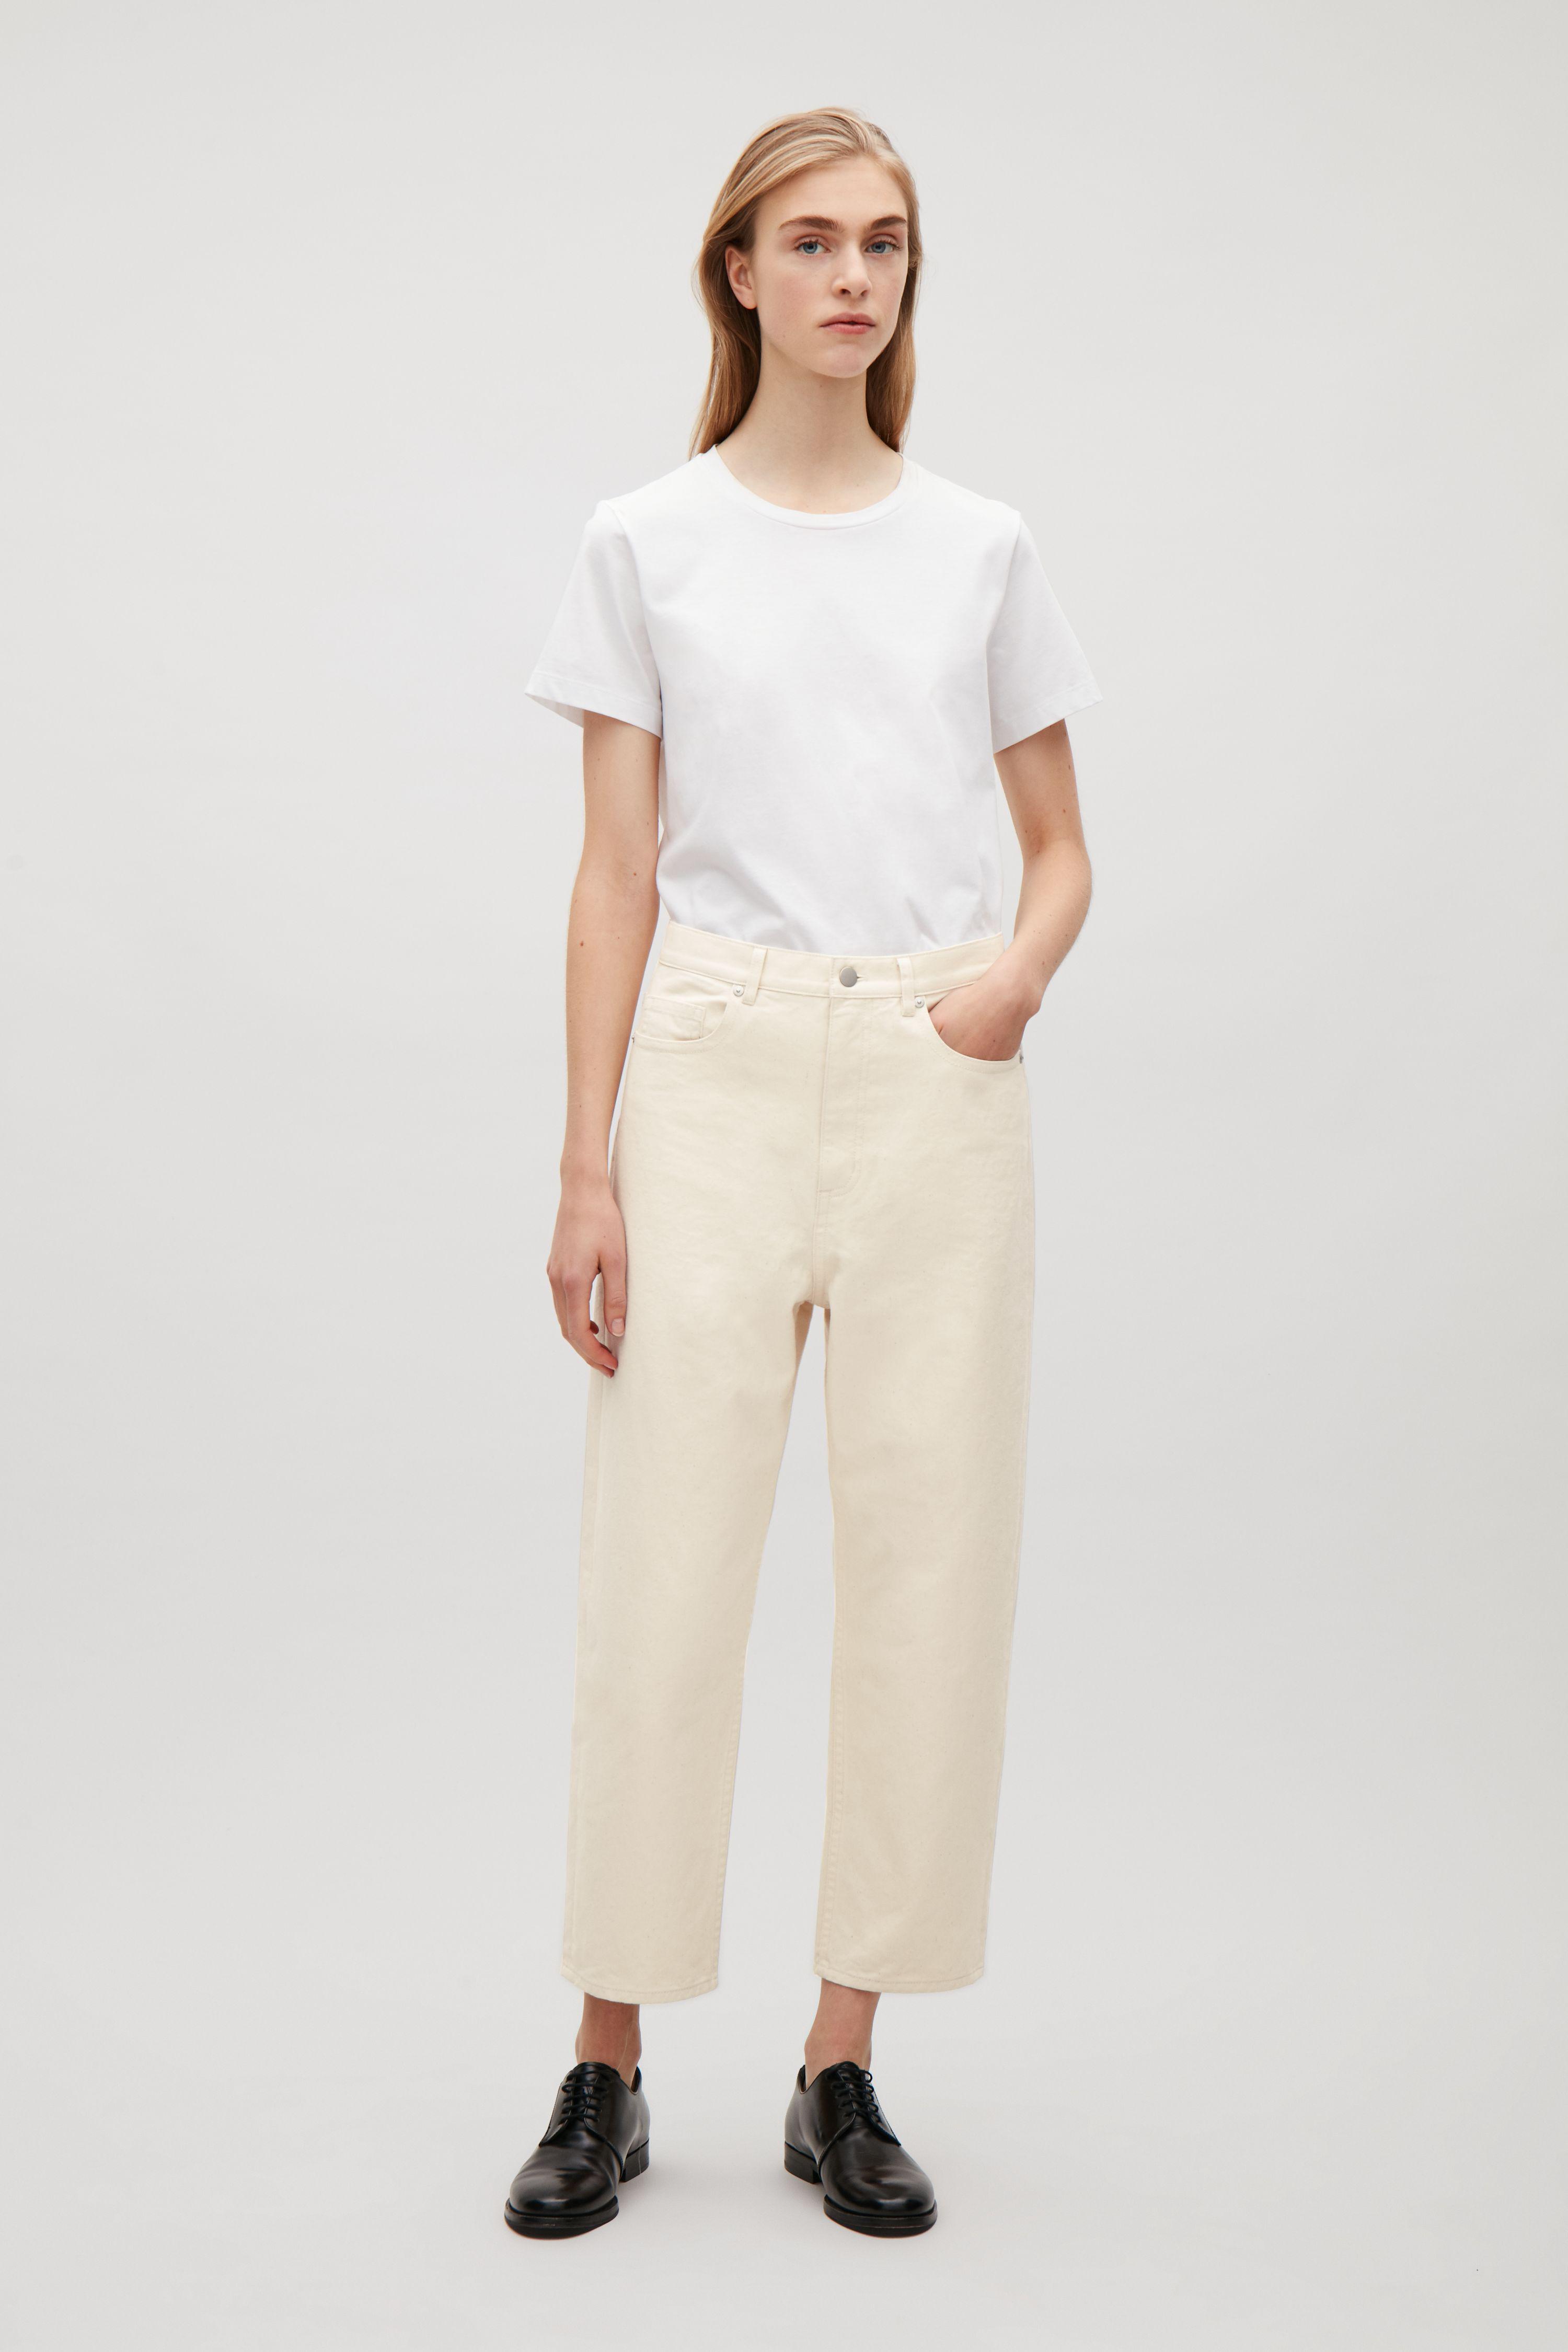 COS Denim Relaxed Straight-fit Jeans in Vanilla (Natural) - Lyst